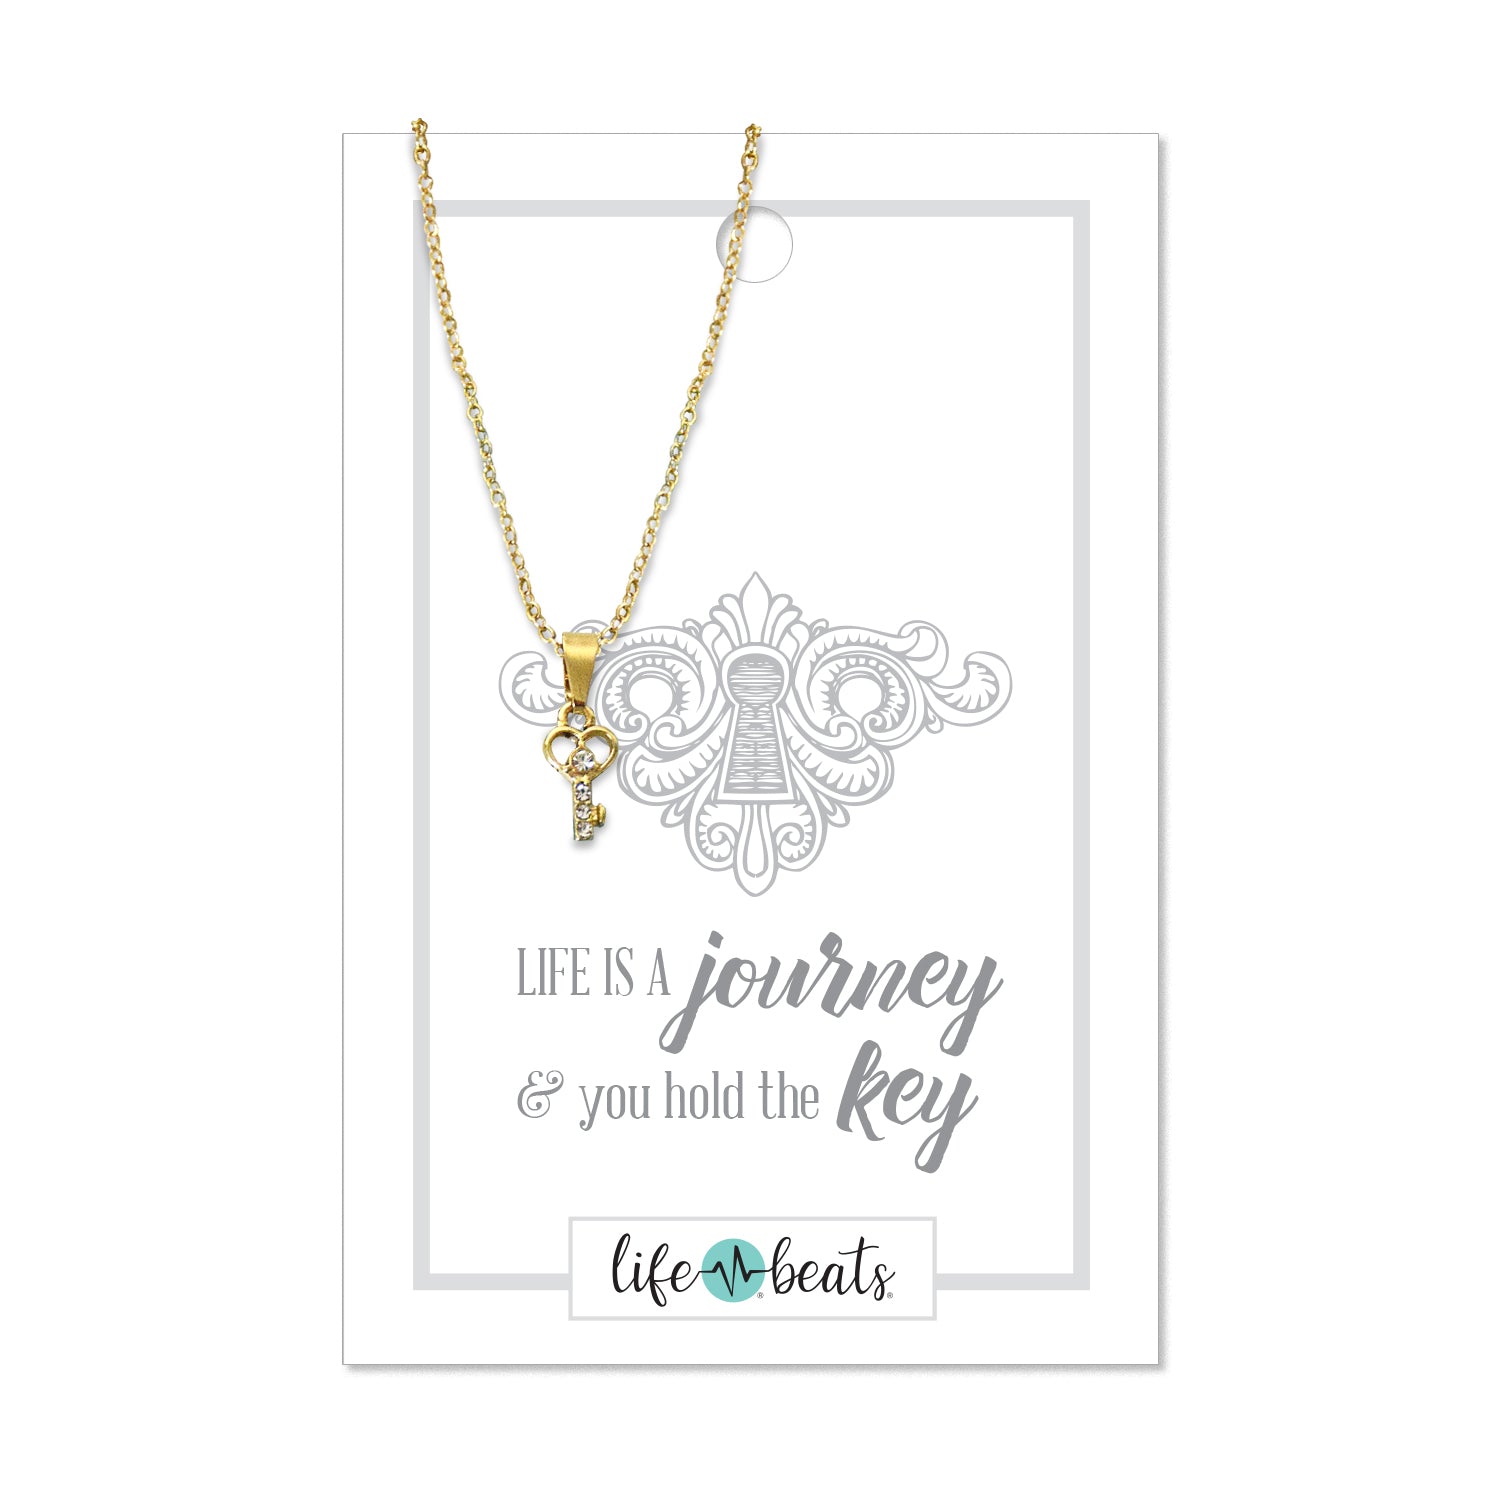 Belle, Beauty and the Beast Key Necklace, by Arribas and Disneyland Paris